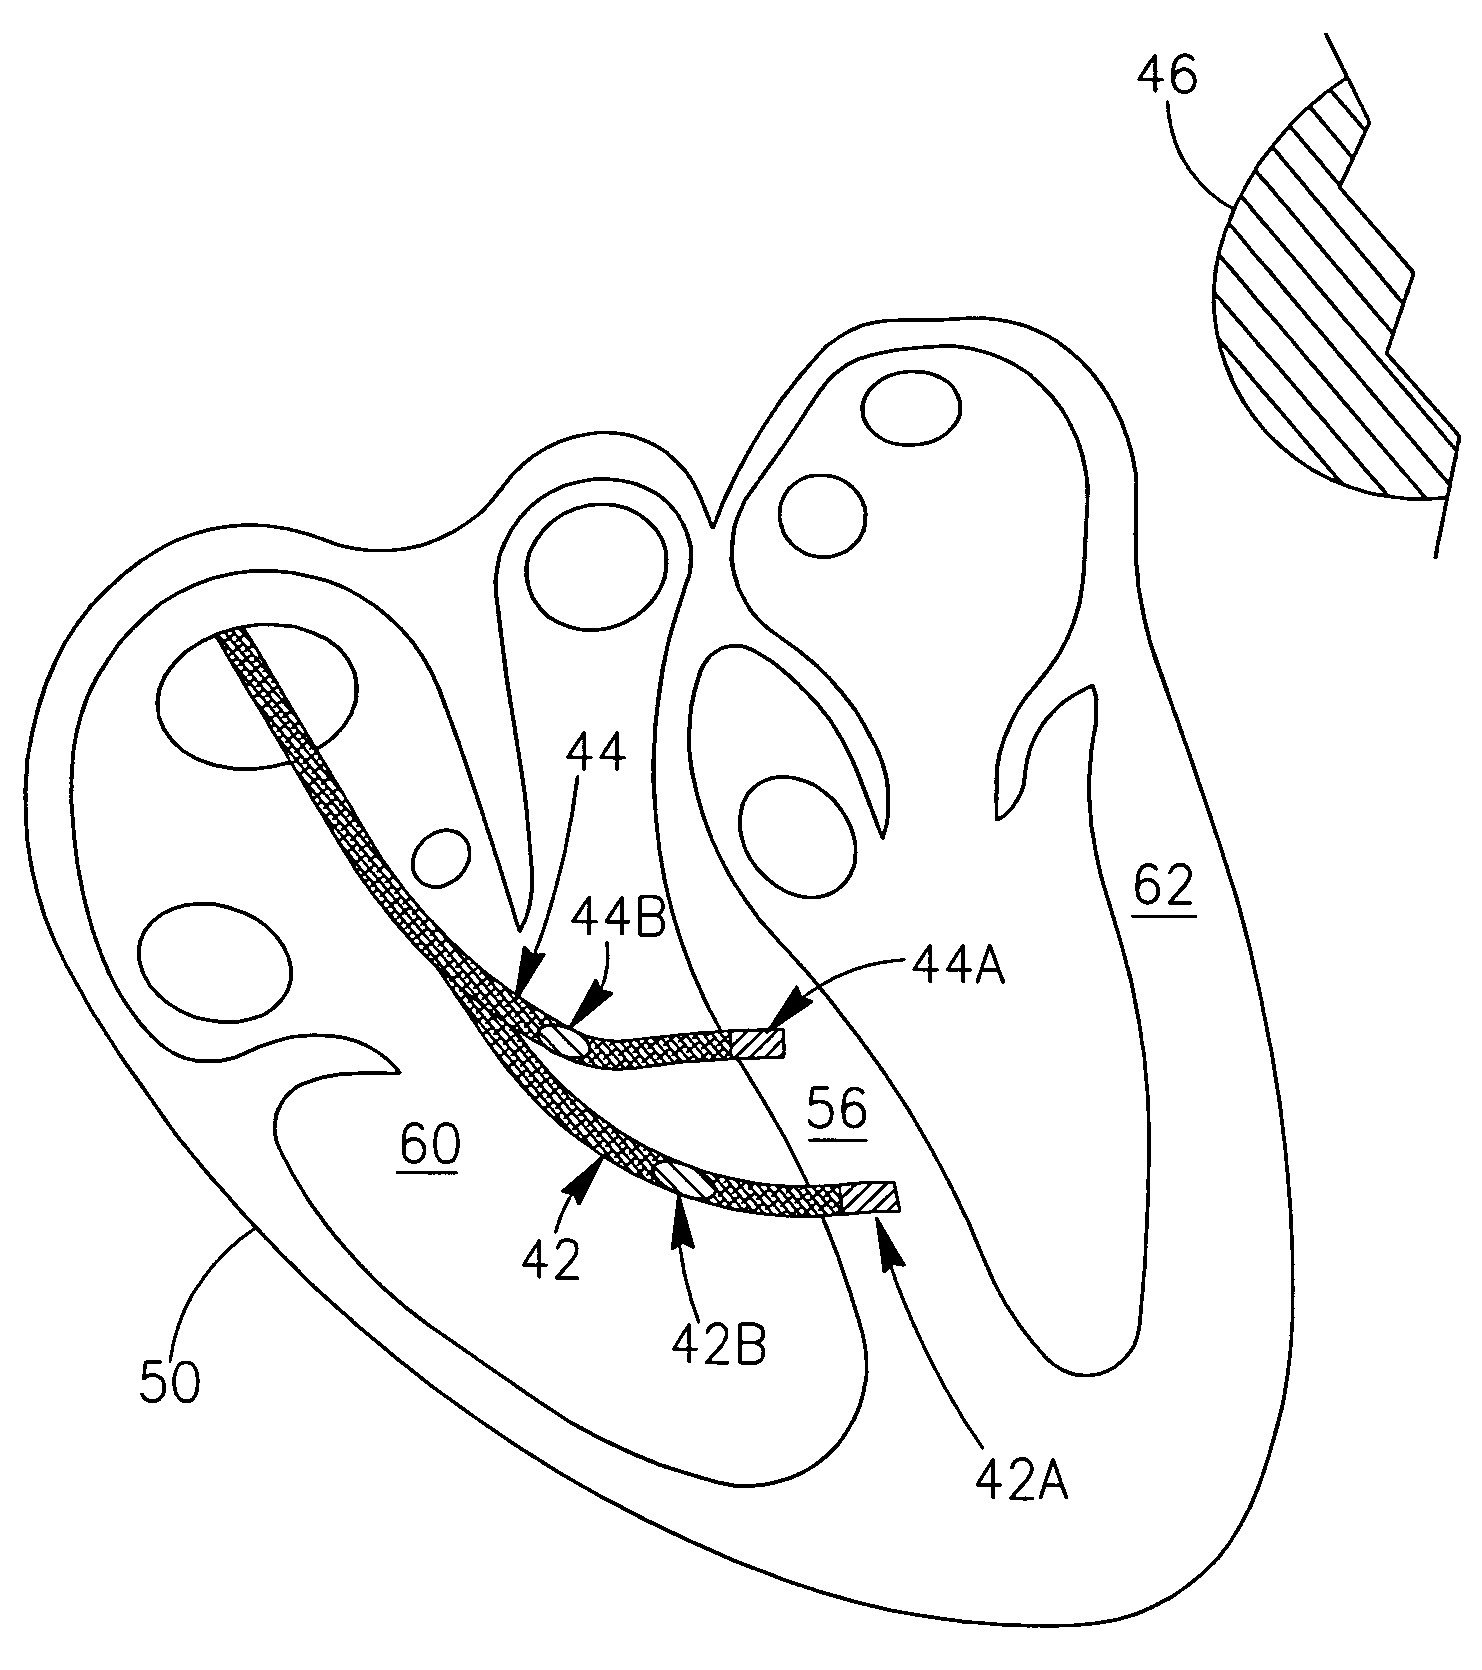 Apparatus and Method for Delivering Electrical Signals to a Heart